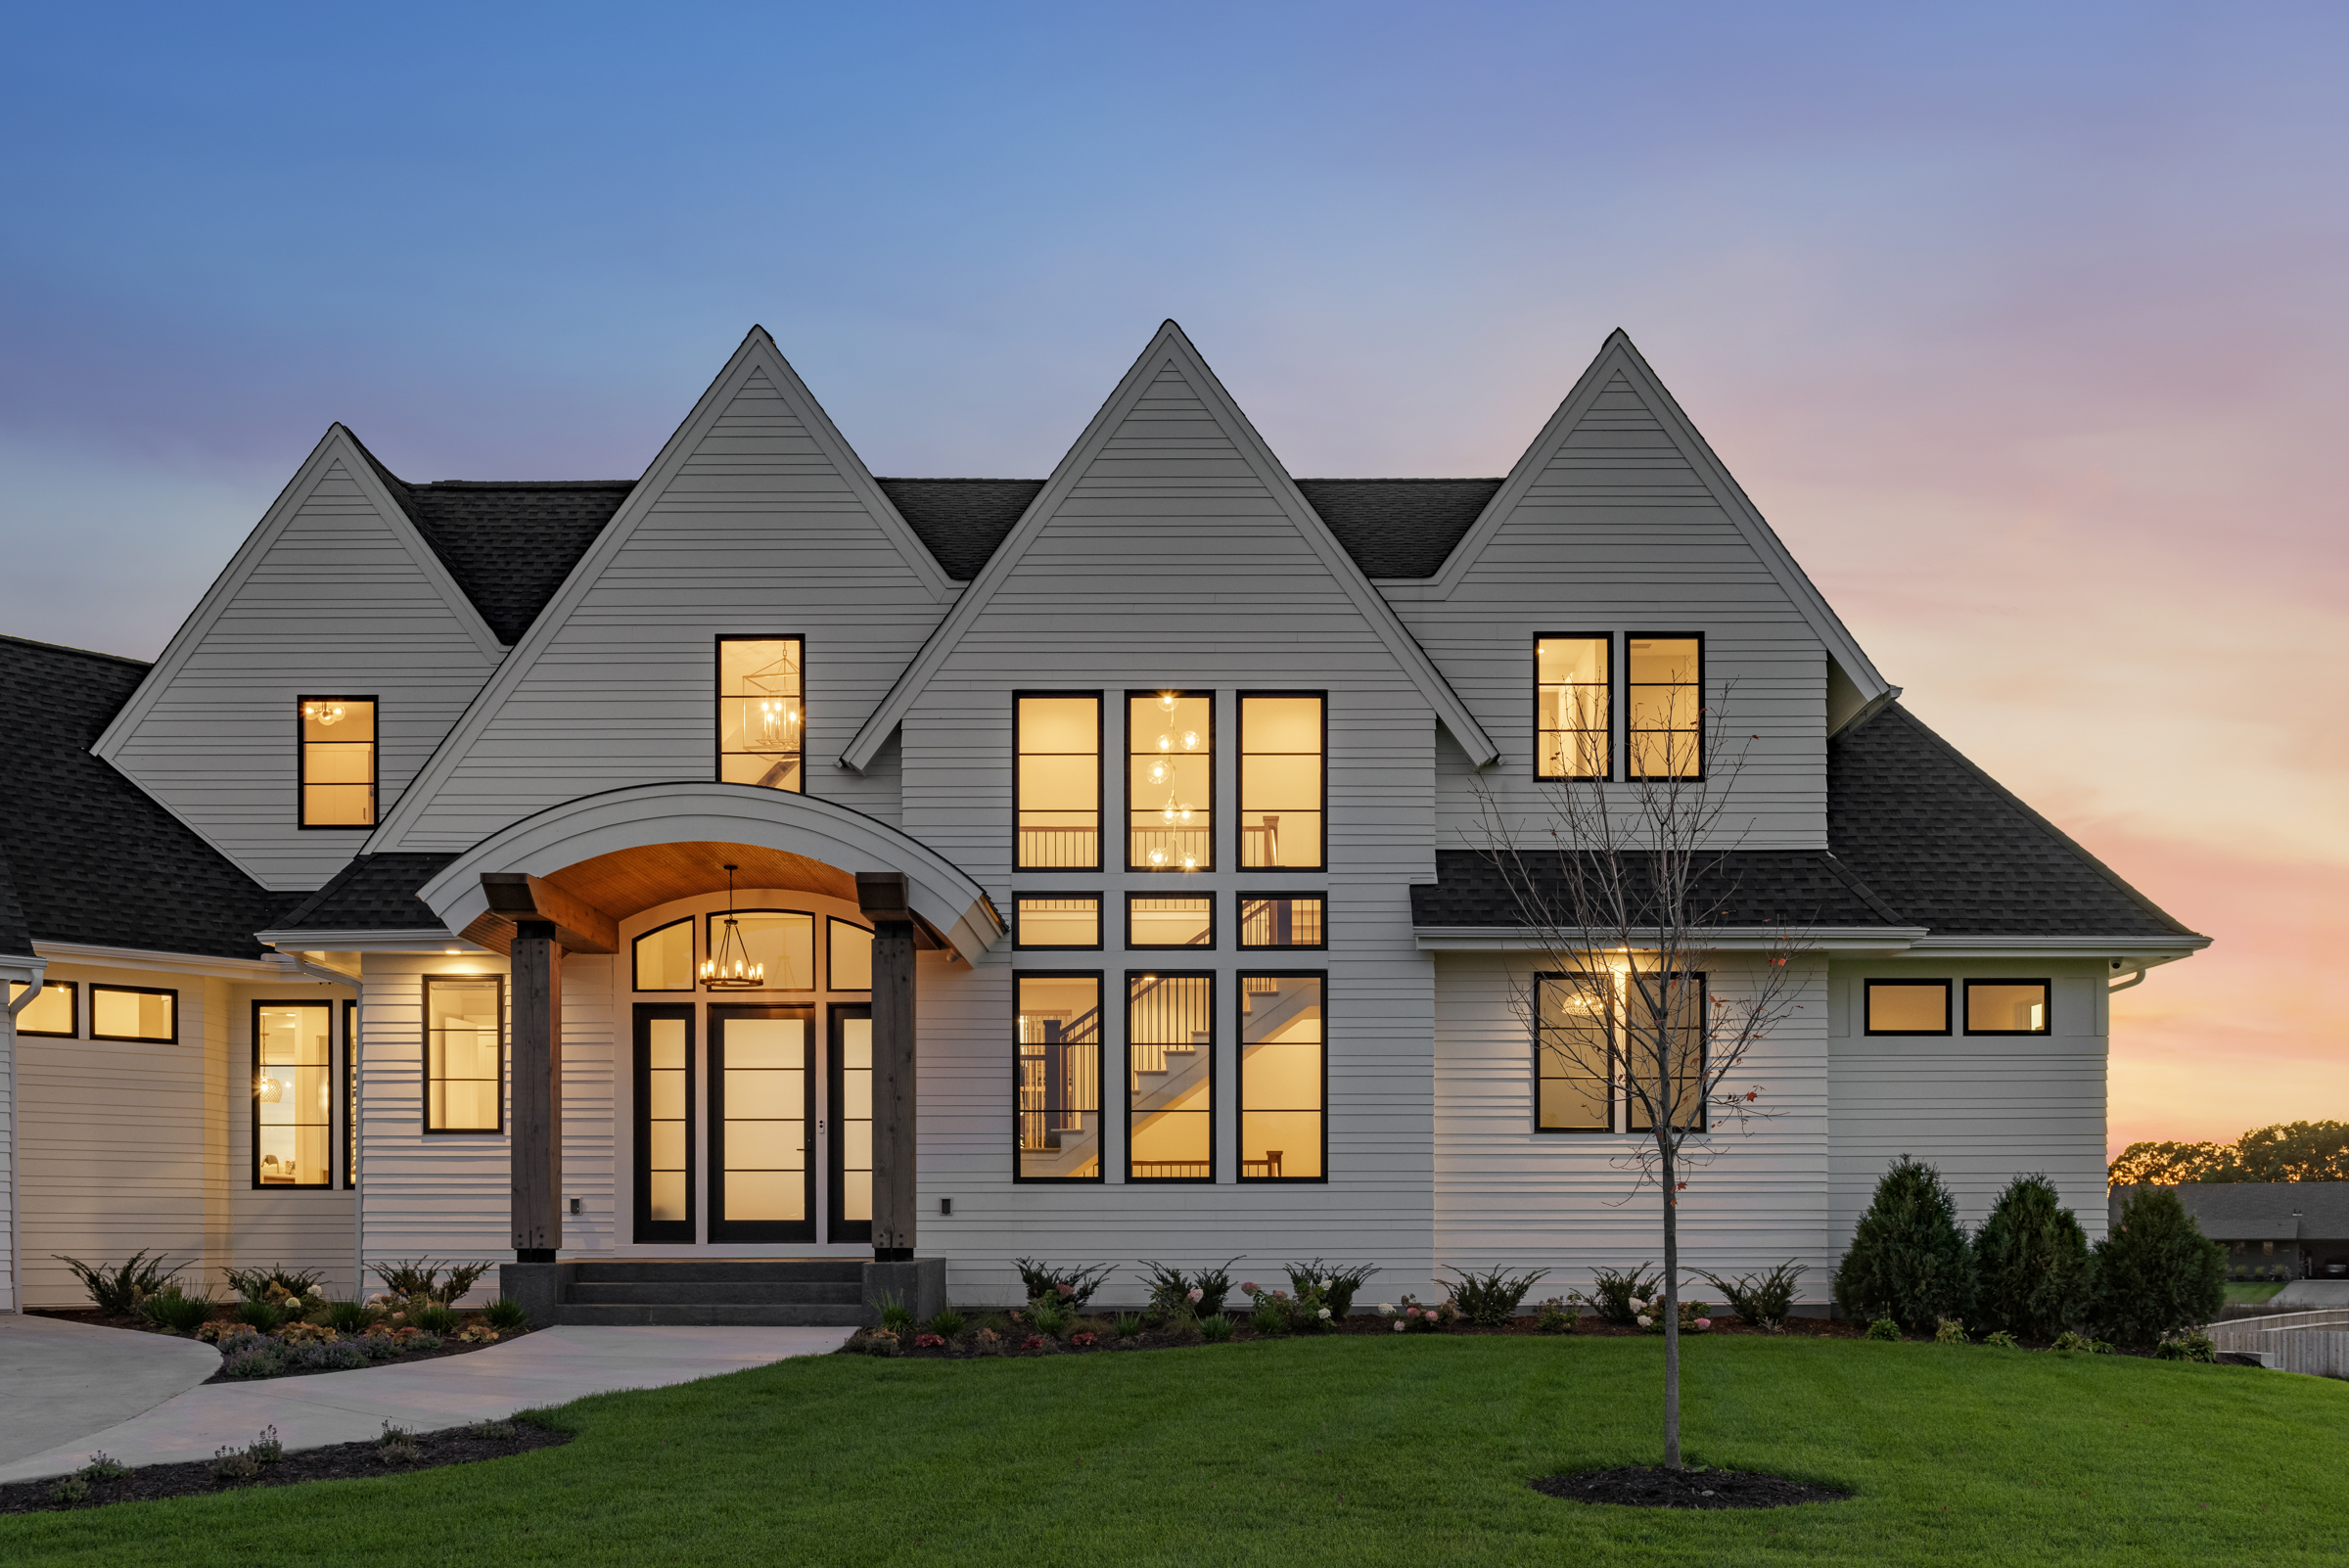 The exterior of a prairie transitional custom home at dusk.